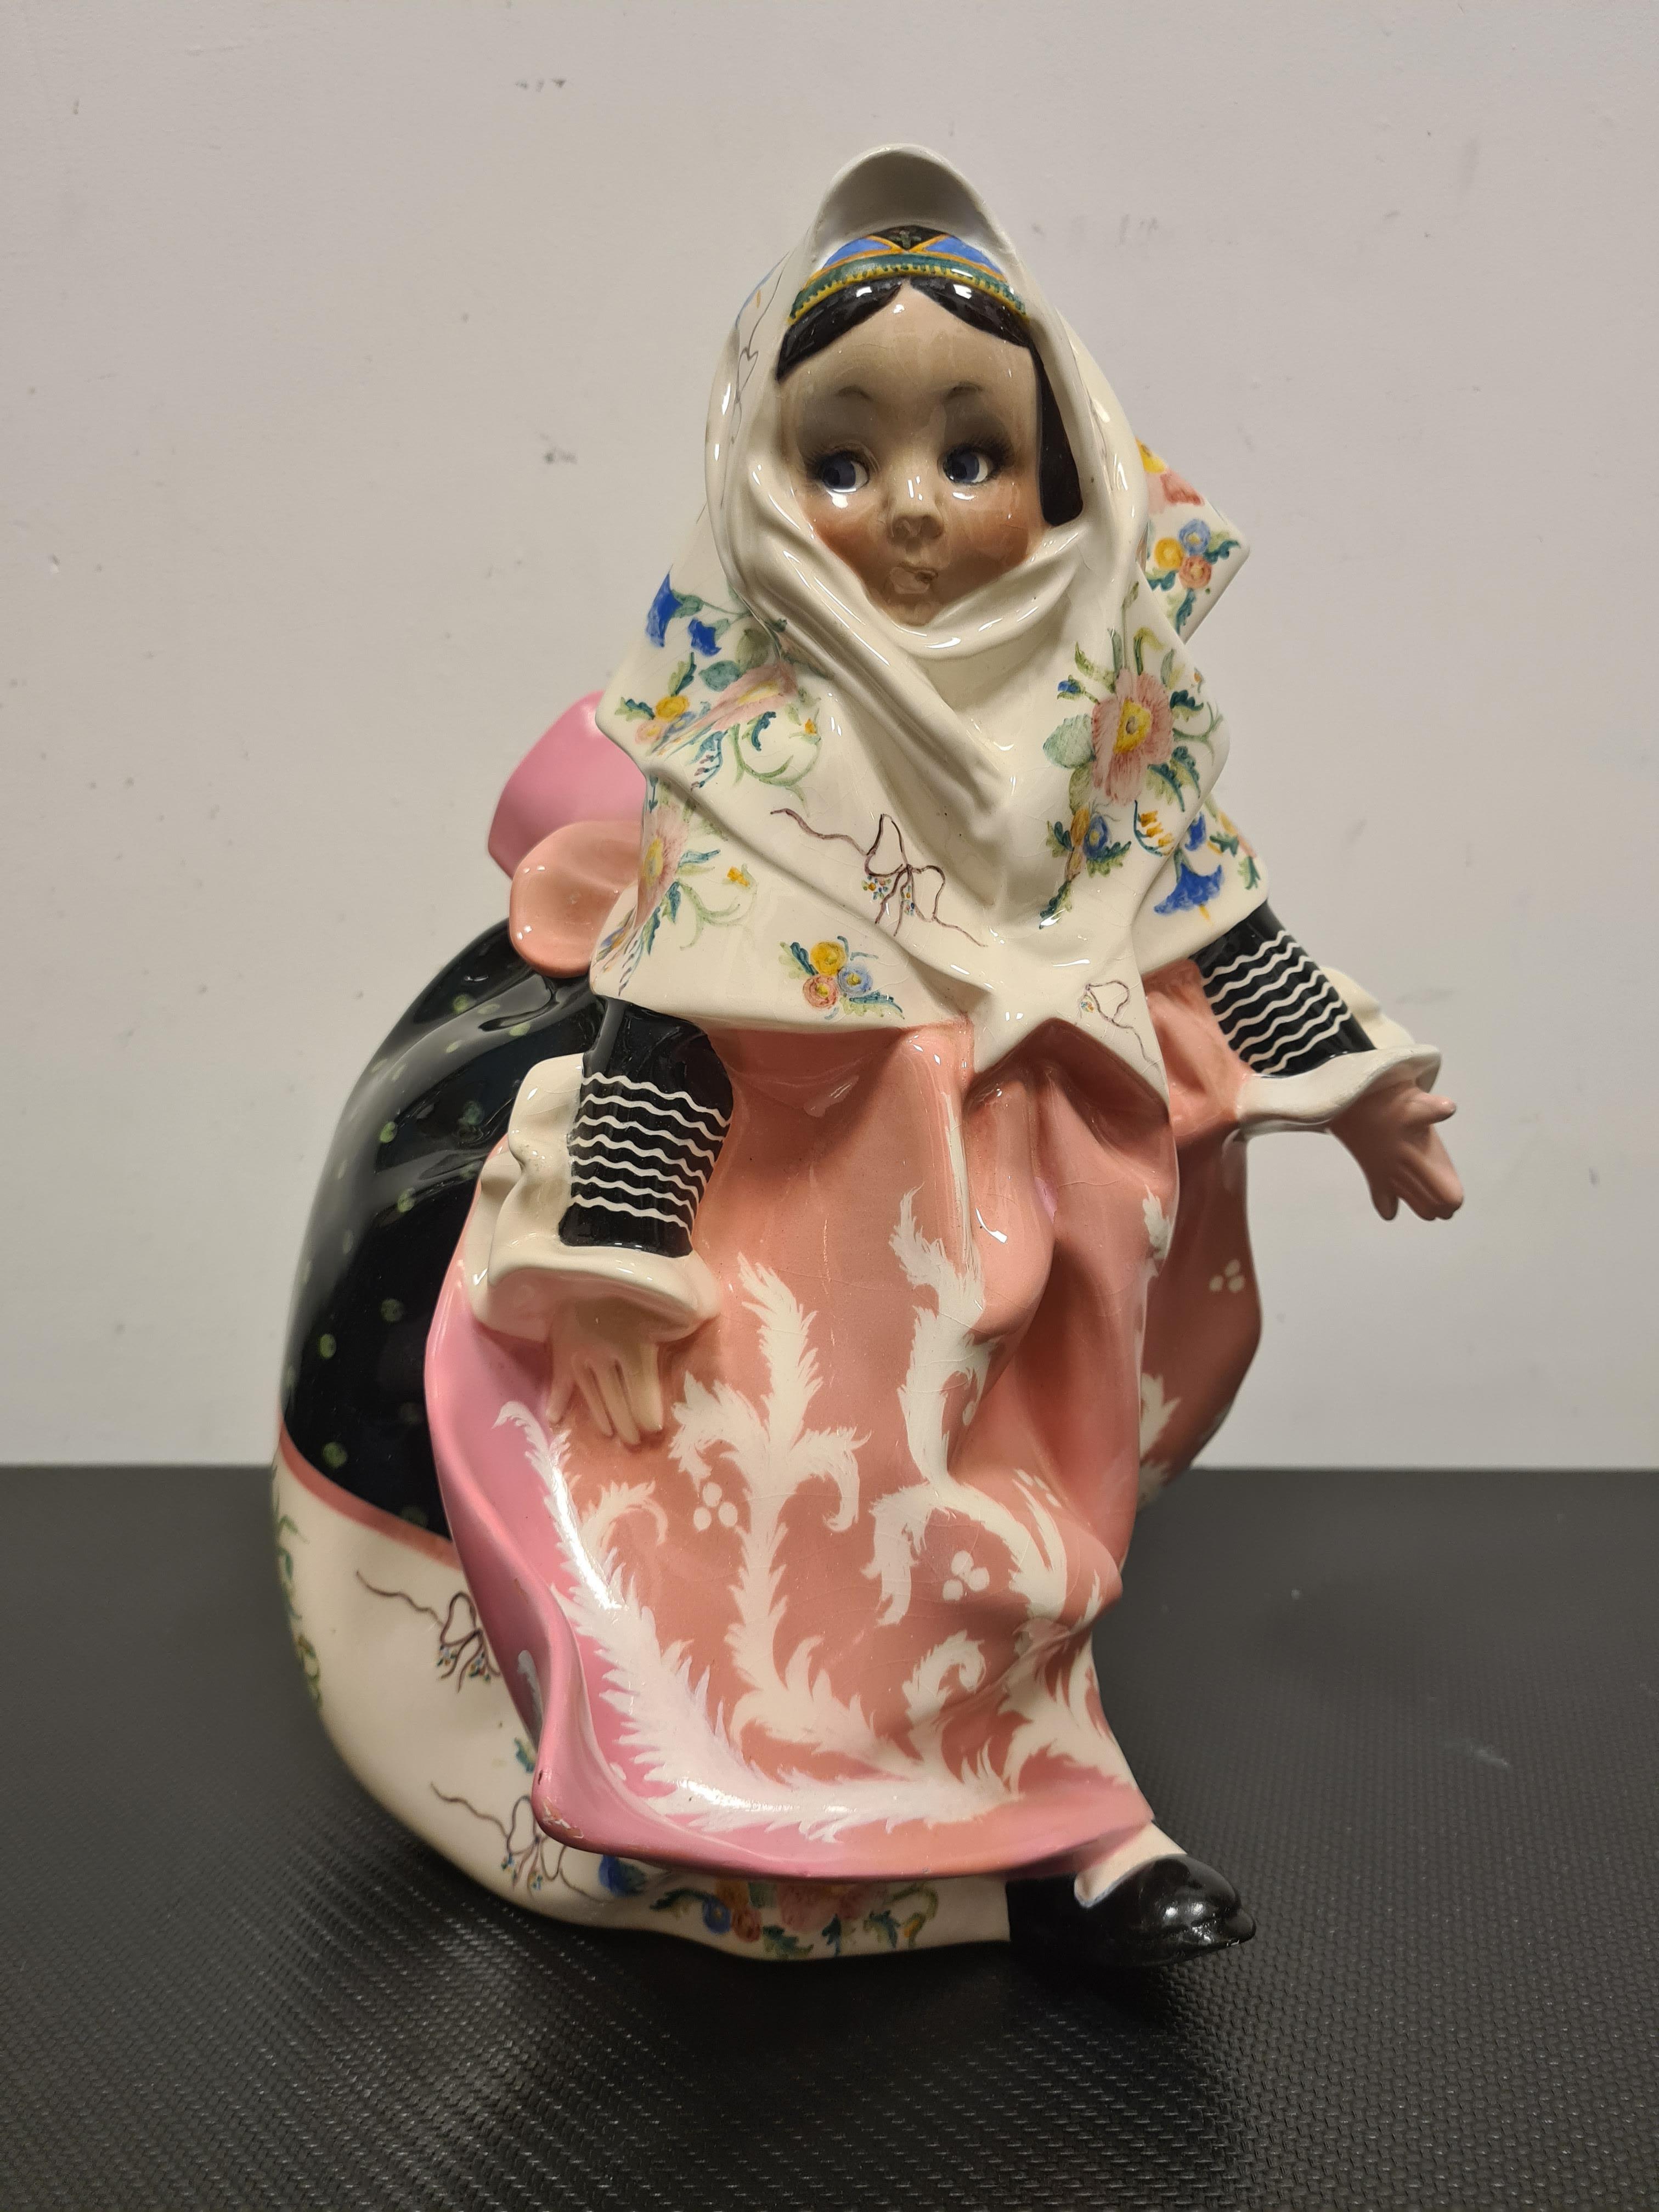 Ceramic depicting little Sardinian girl designed by Sandro Vacchetti.

Delightful ceramic statue depicting sweet little girl in traditional Sardinian dress.

The work is model No. 254 and was designed by Sandro Vacchetti for Essevi.

This one in